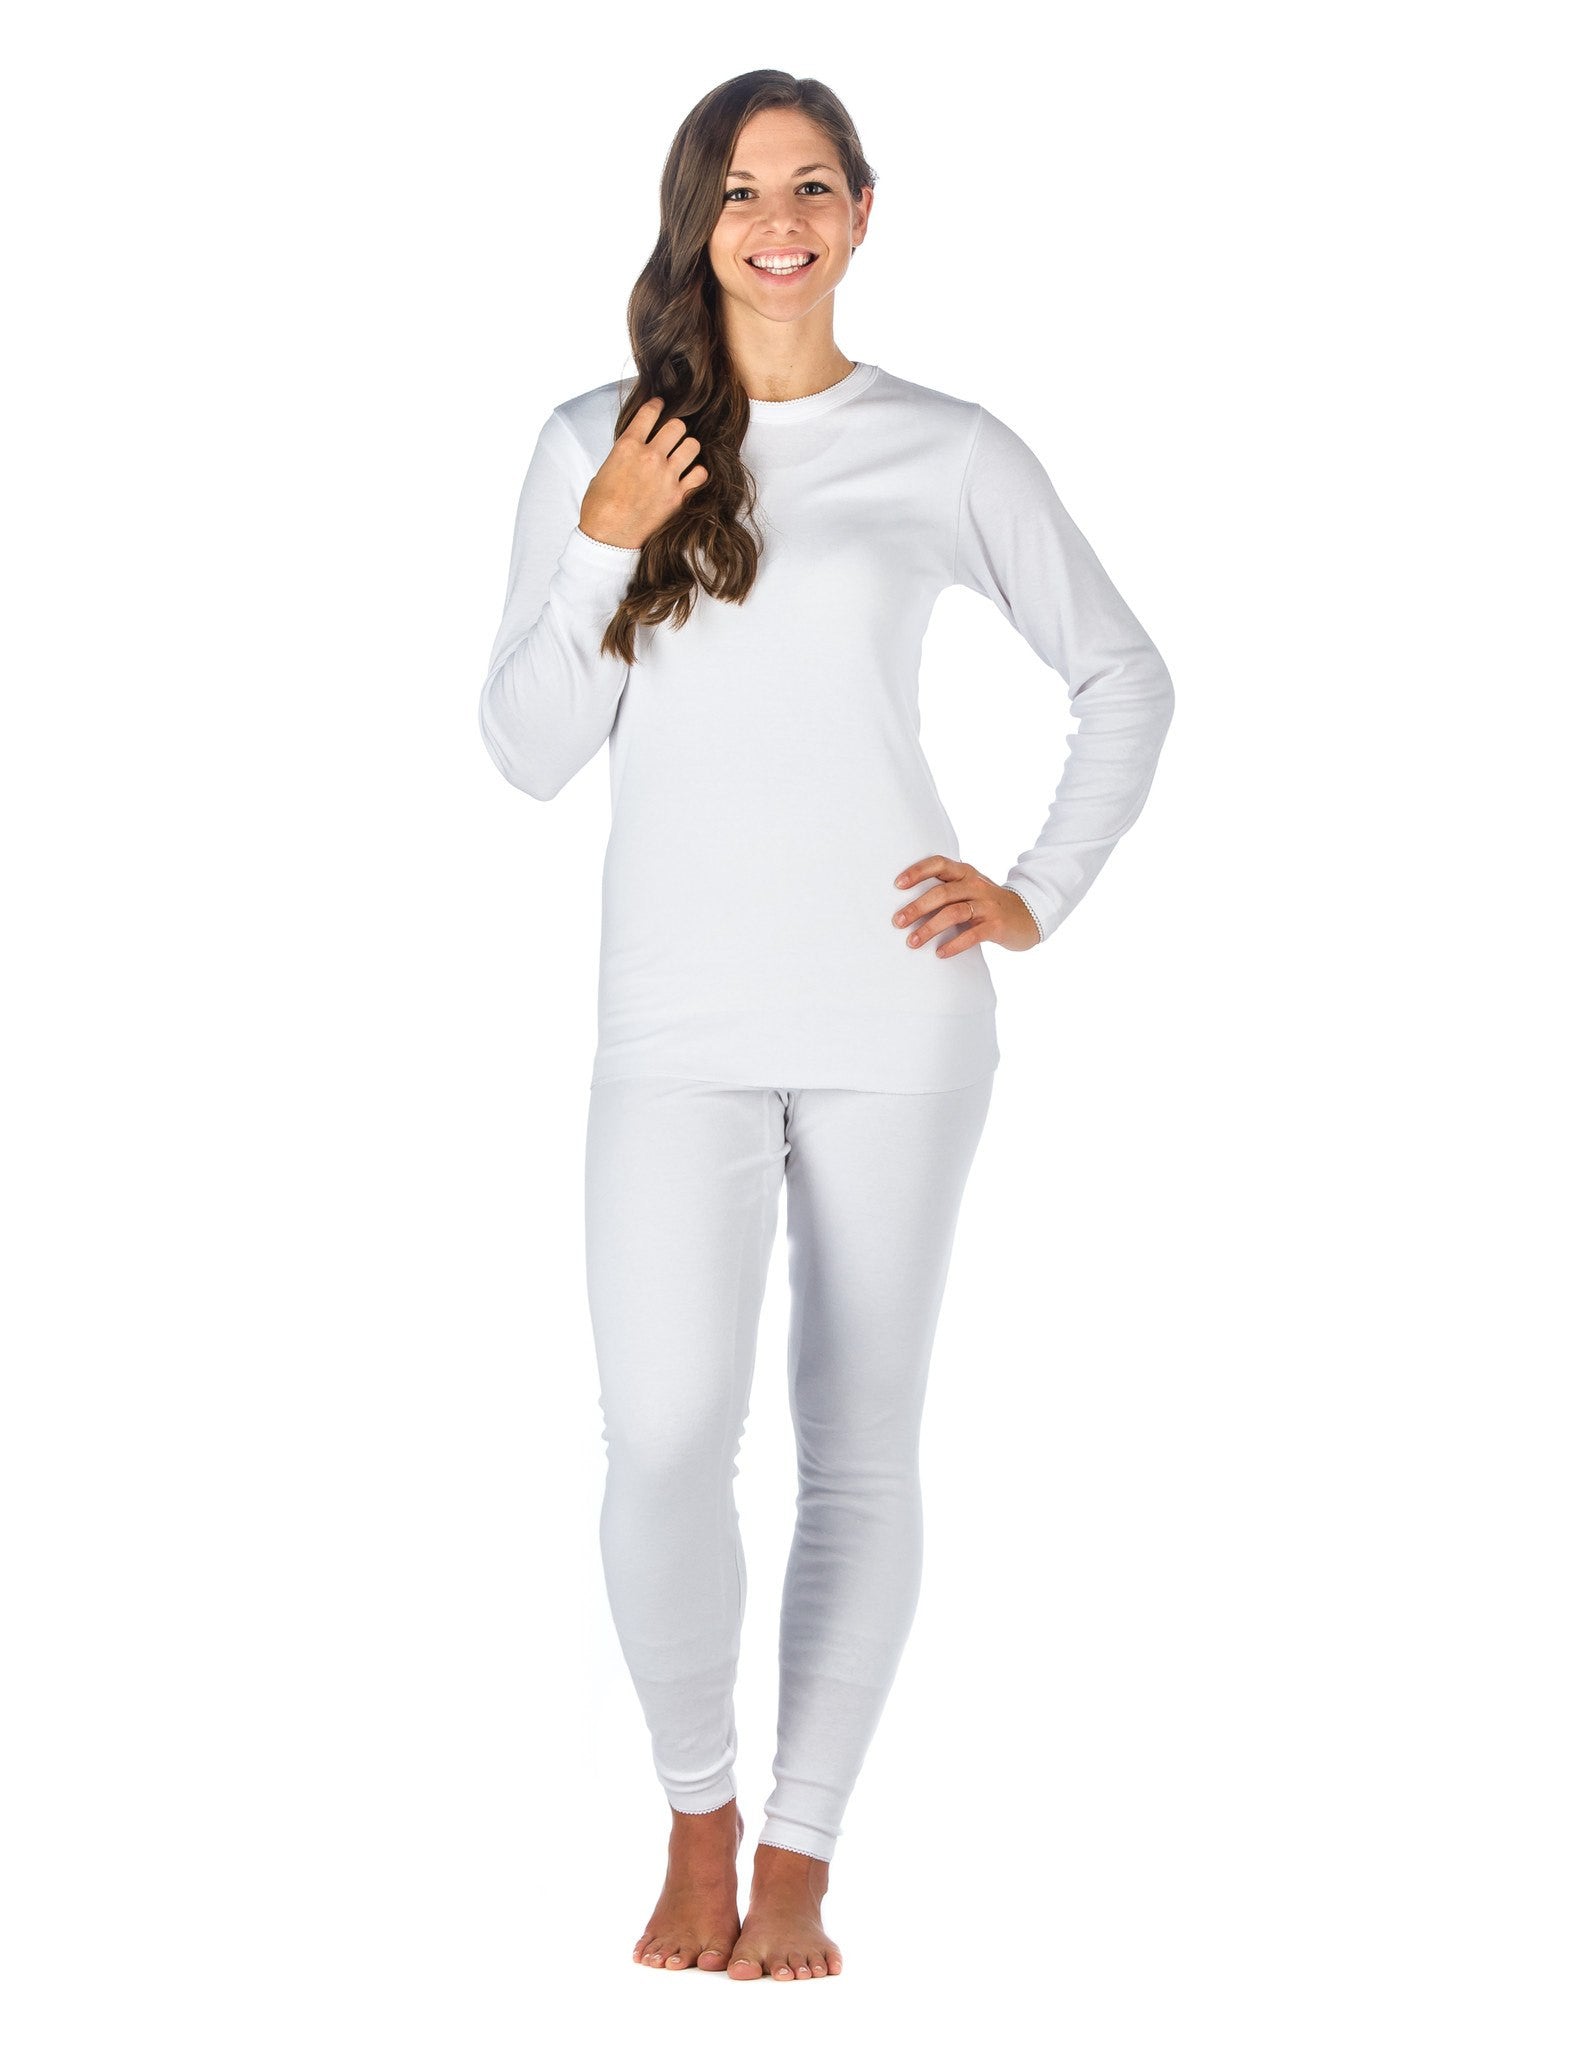 Noble Mount Women's 'Soft Comfort' Thermal Long Johns